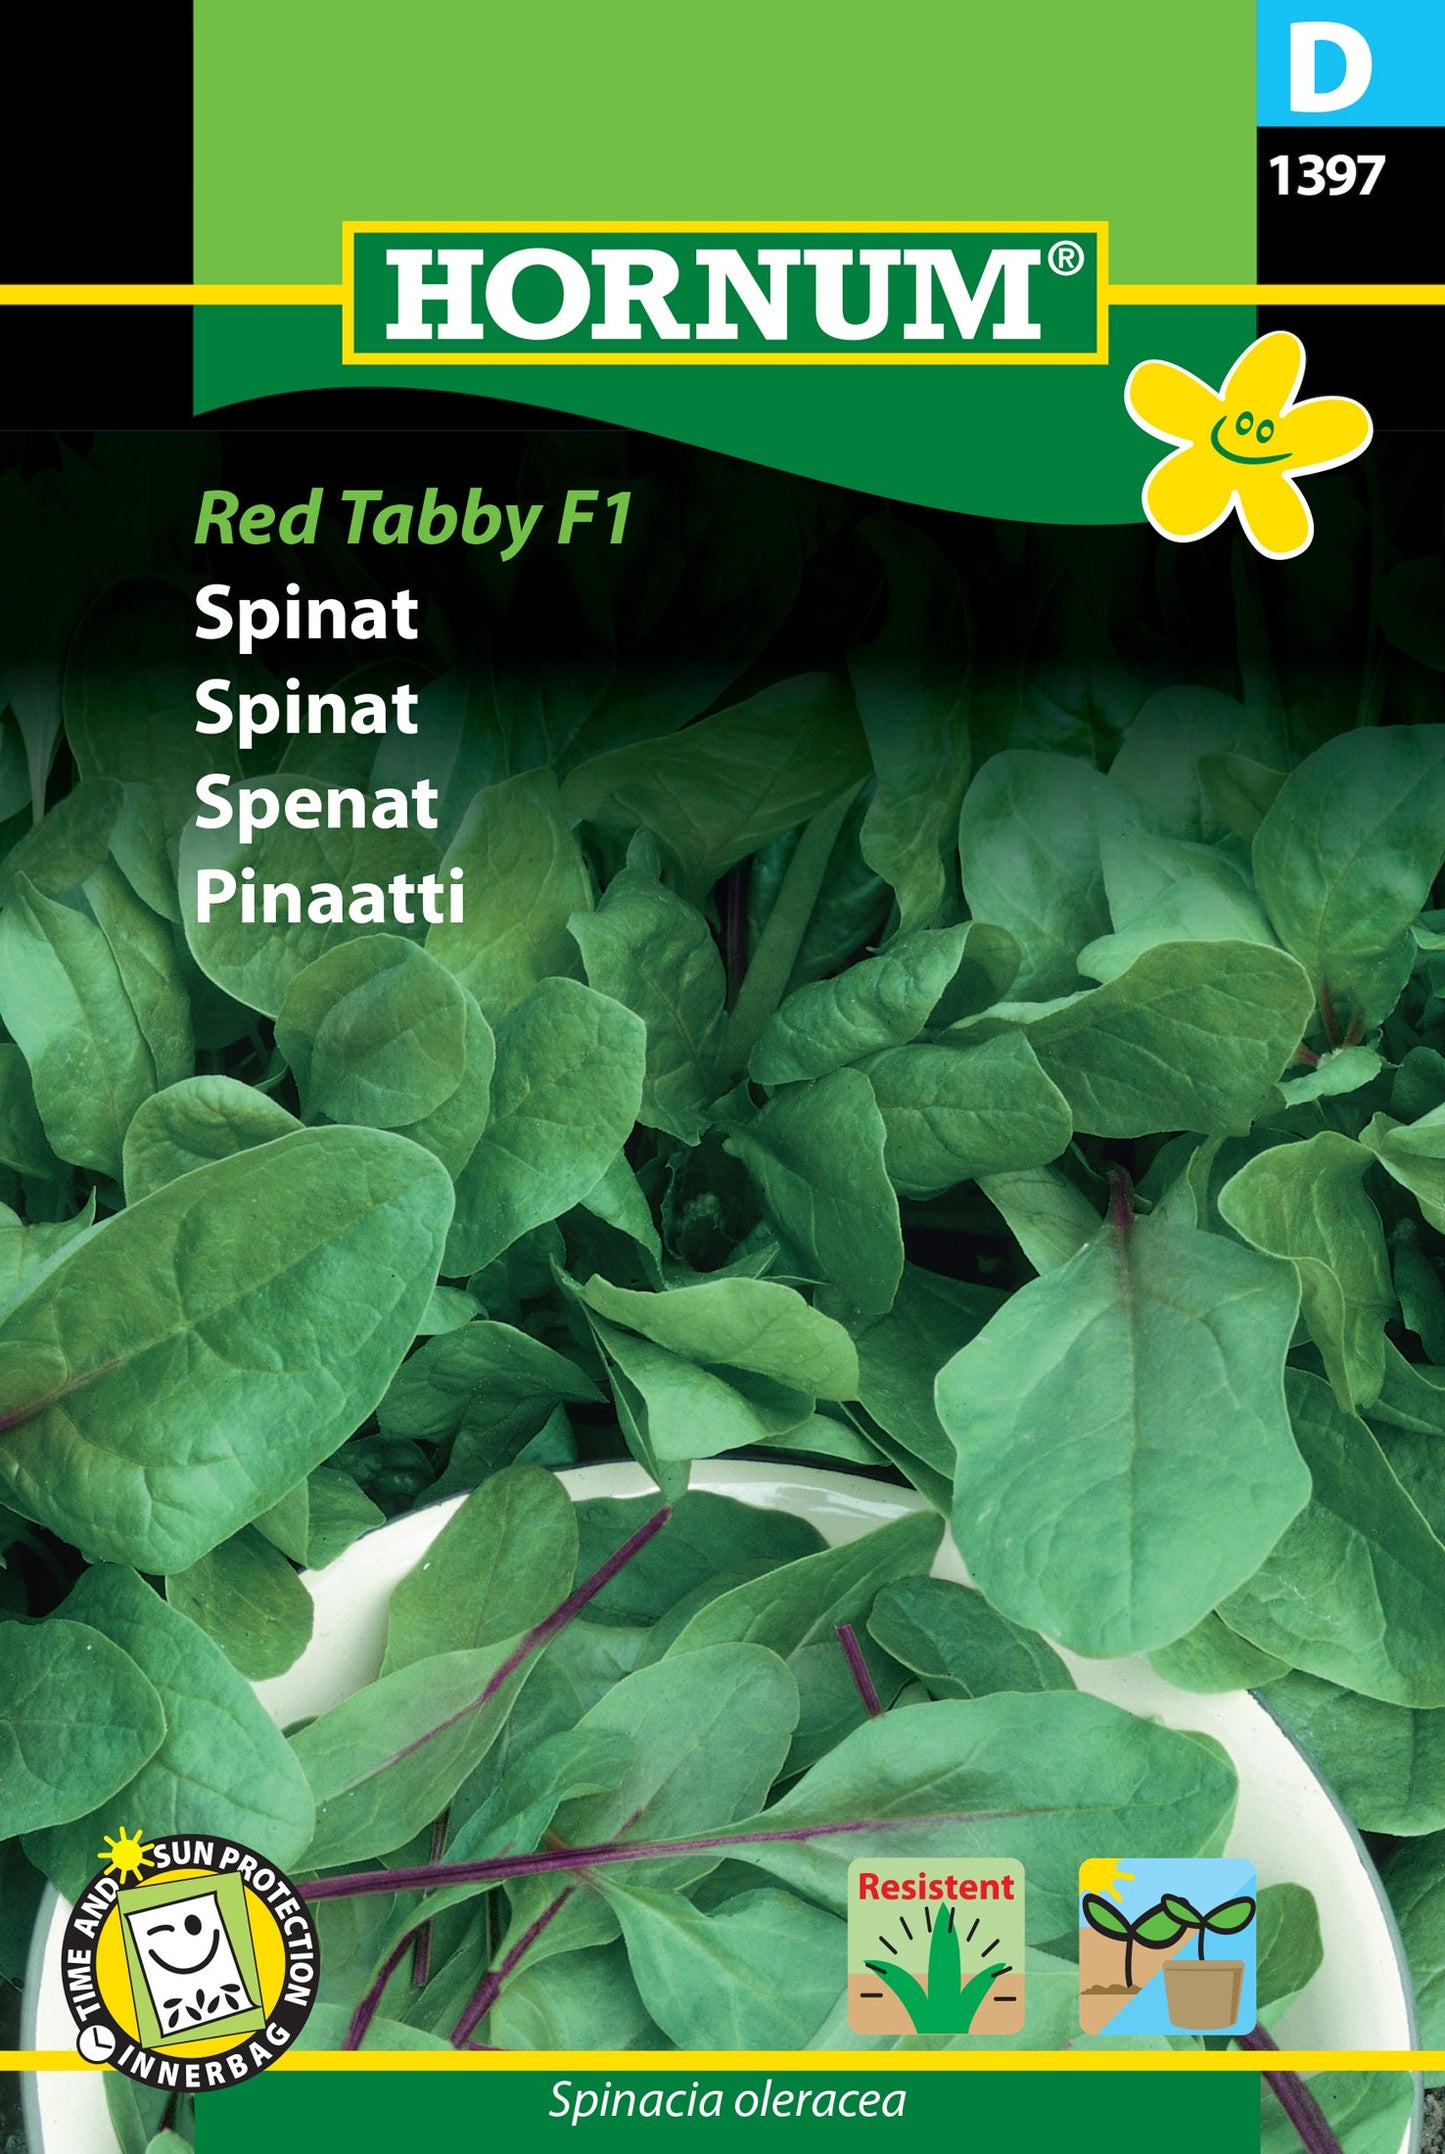 Spinach 'Red Tabby F1'